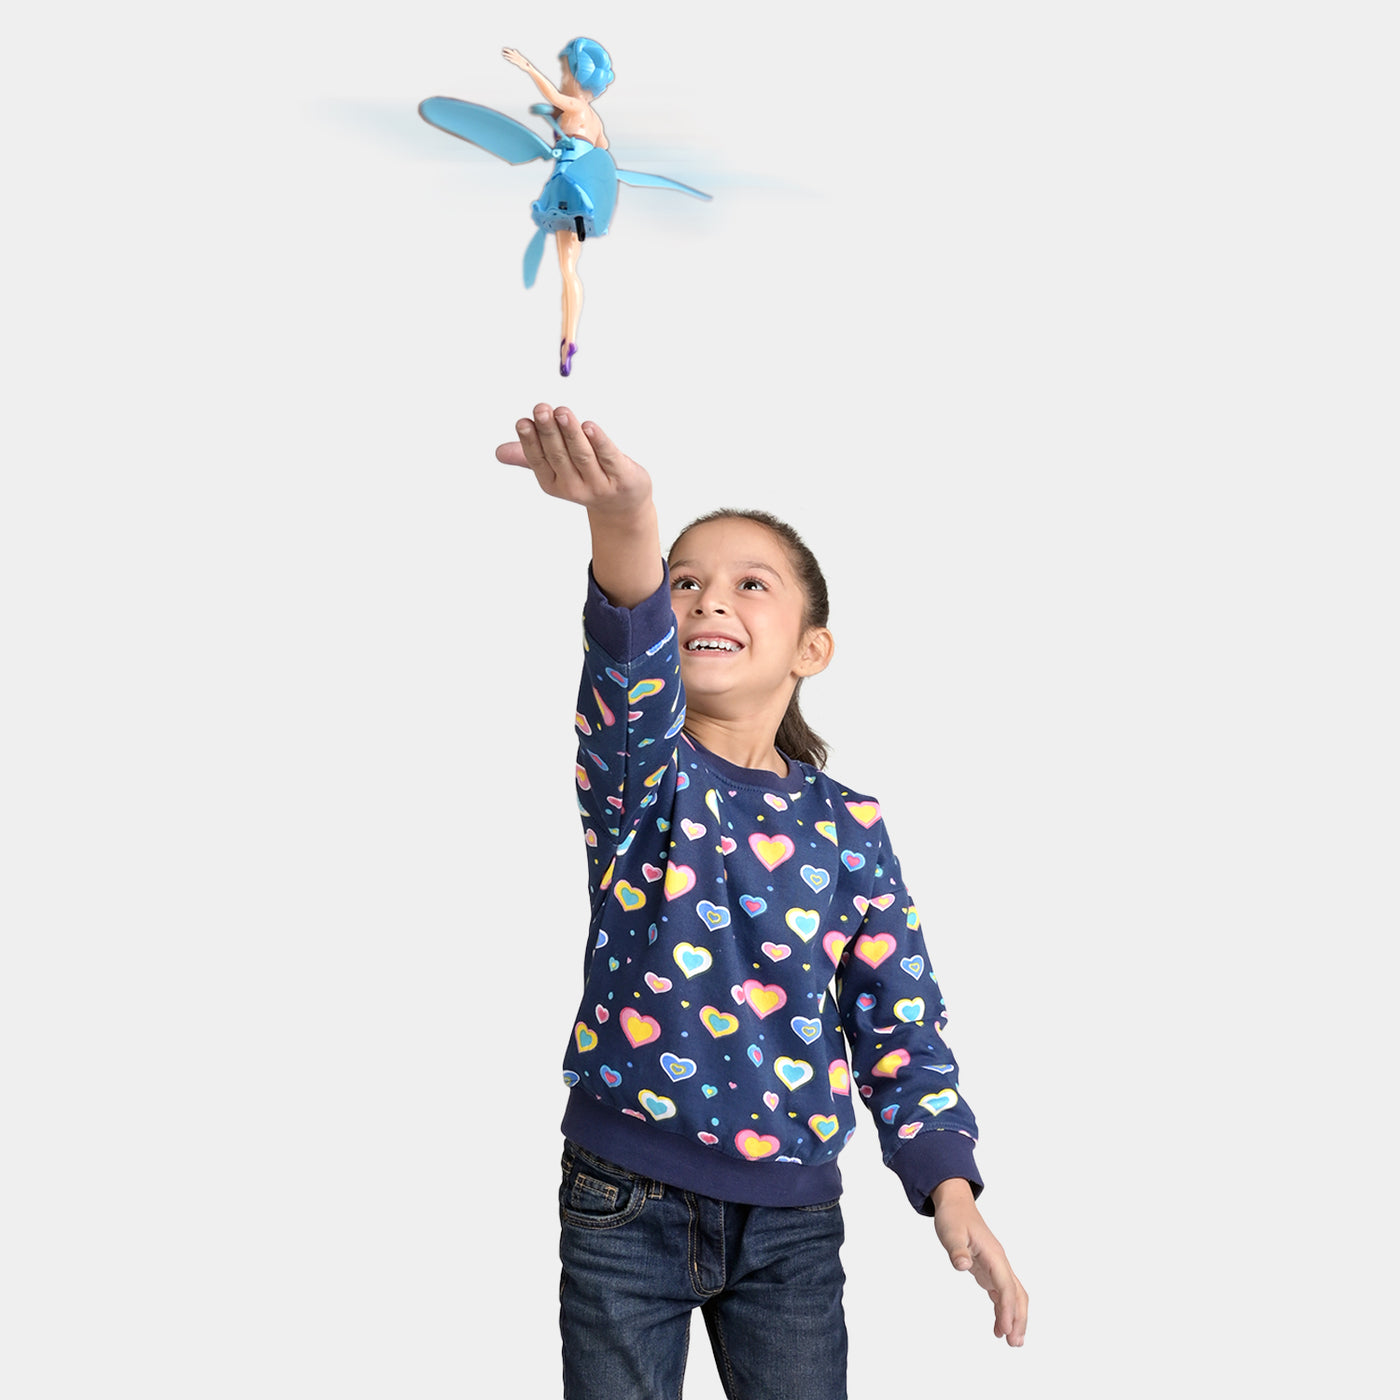 AIRCRAFT FLYING DOLL FOR KIDS - BLUE